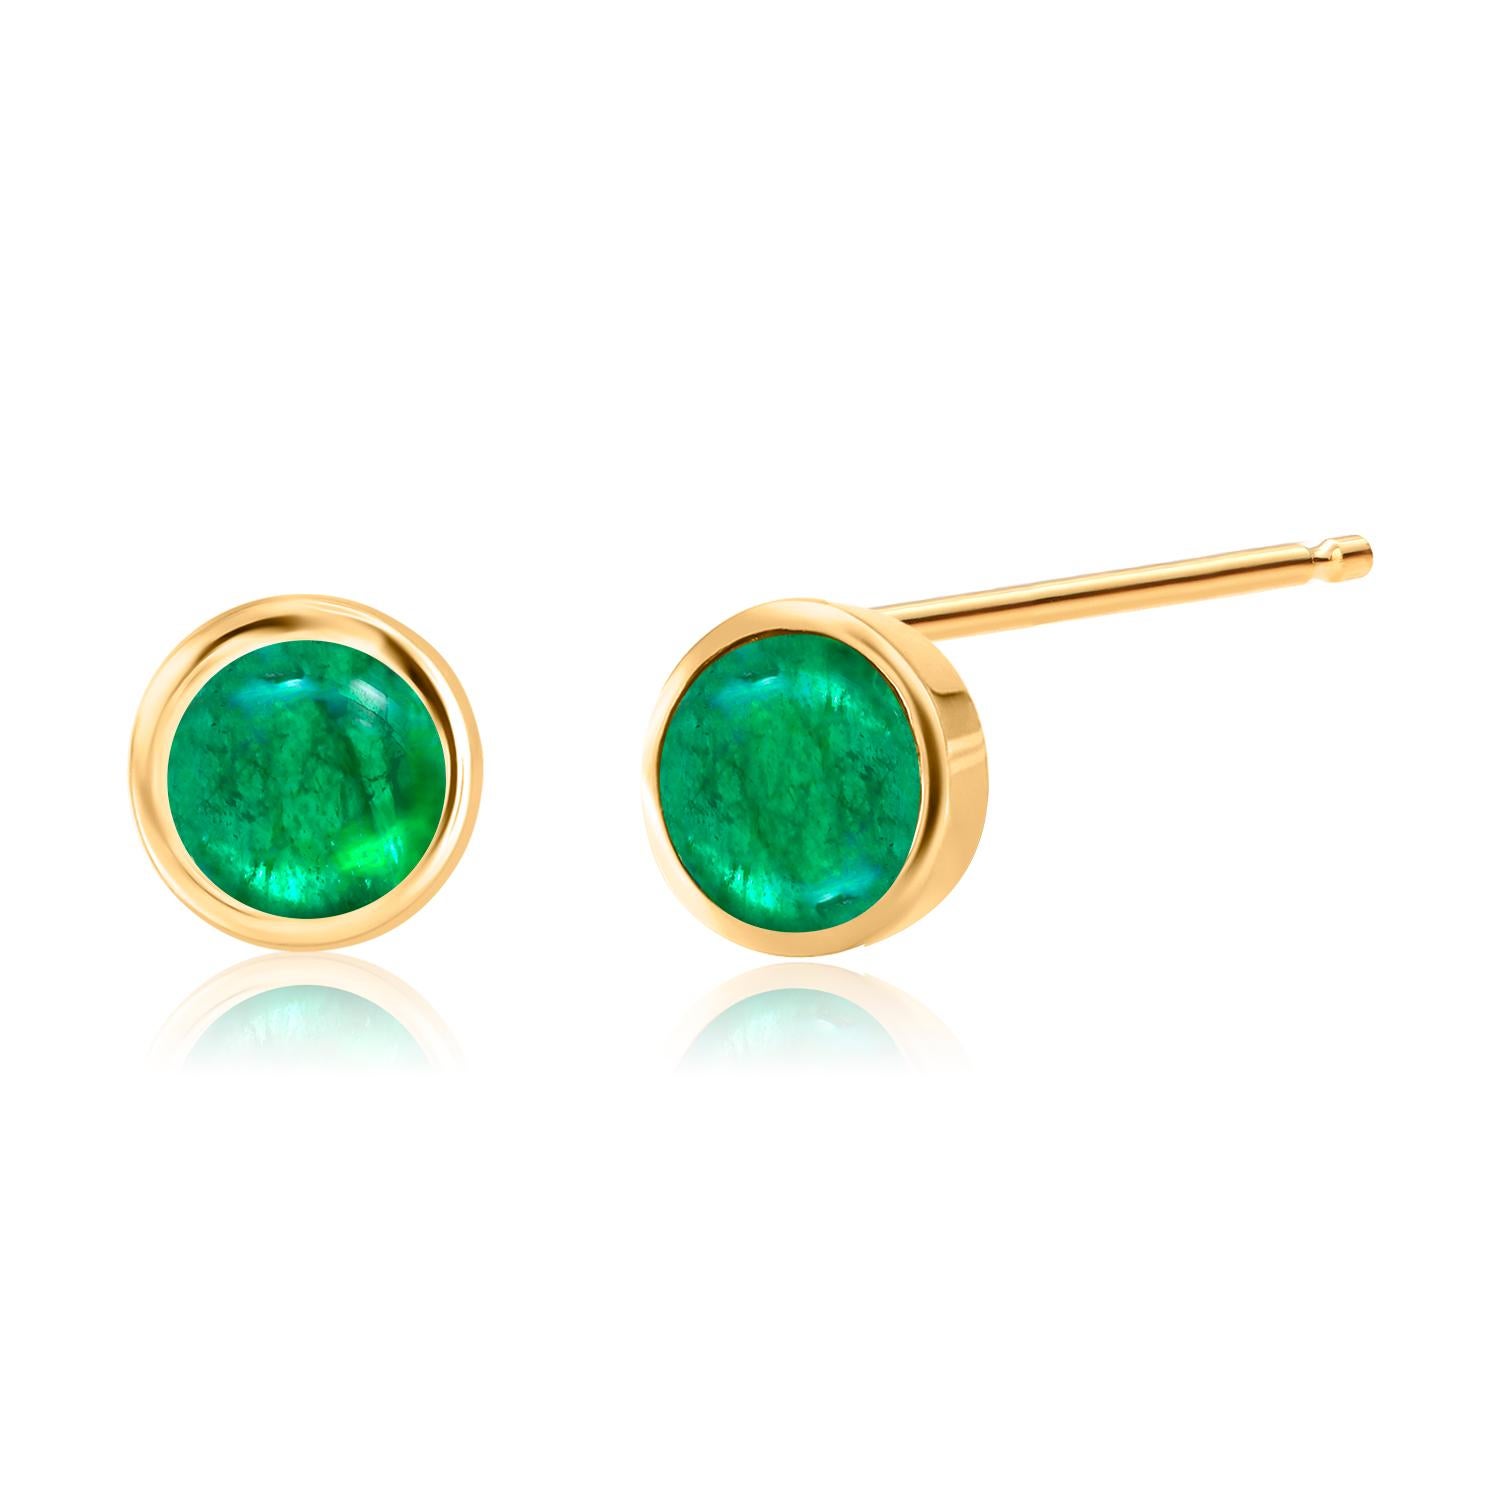 Matched Cabochon Emerald 1.10 Carat Bezel Set Yellow Gold 0.25 Inch Earrings In New Condition For Sale In New York, NY